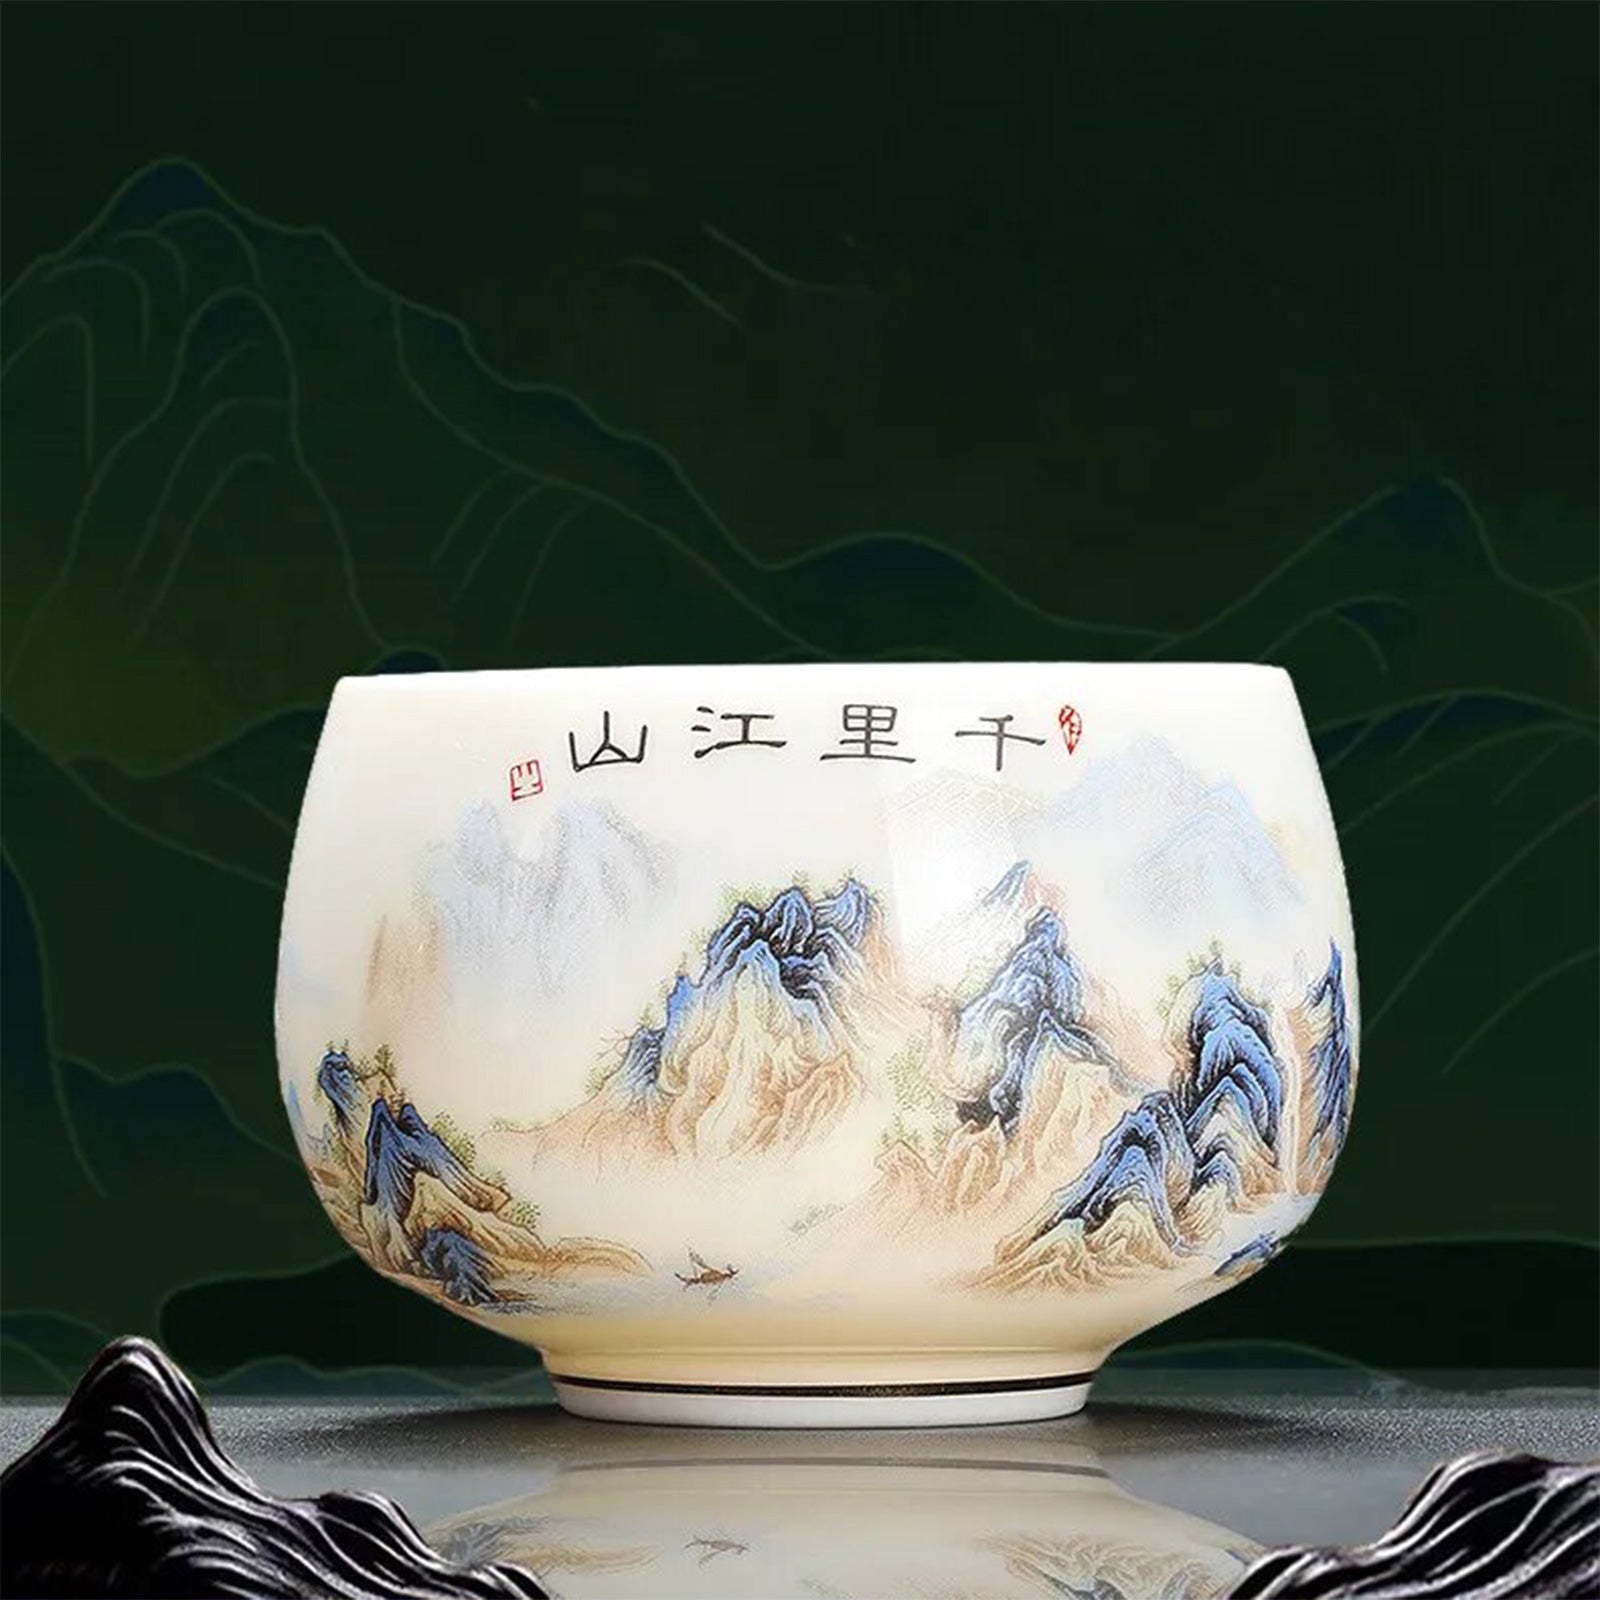 Classic Chinese Porcelain Teacups with Modern Prints